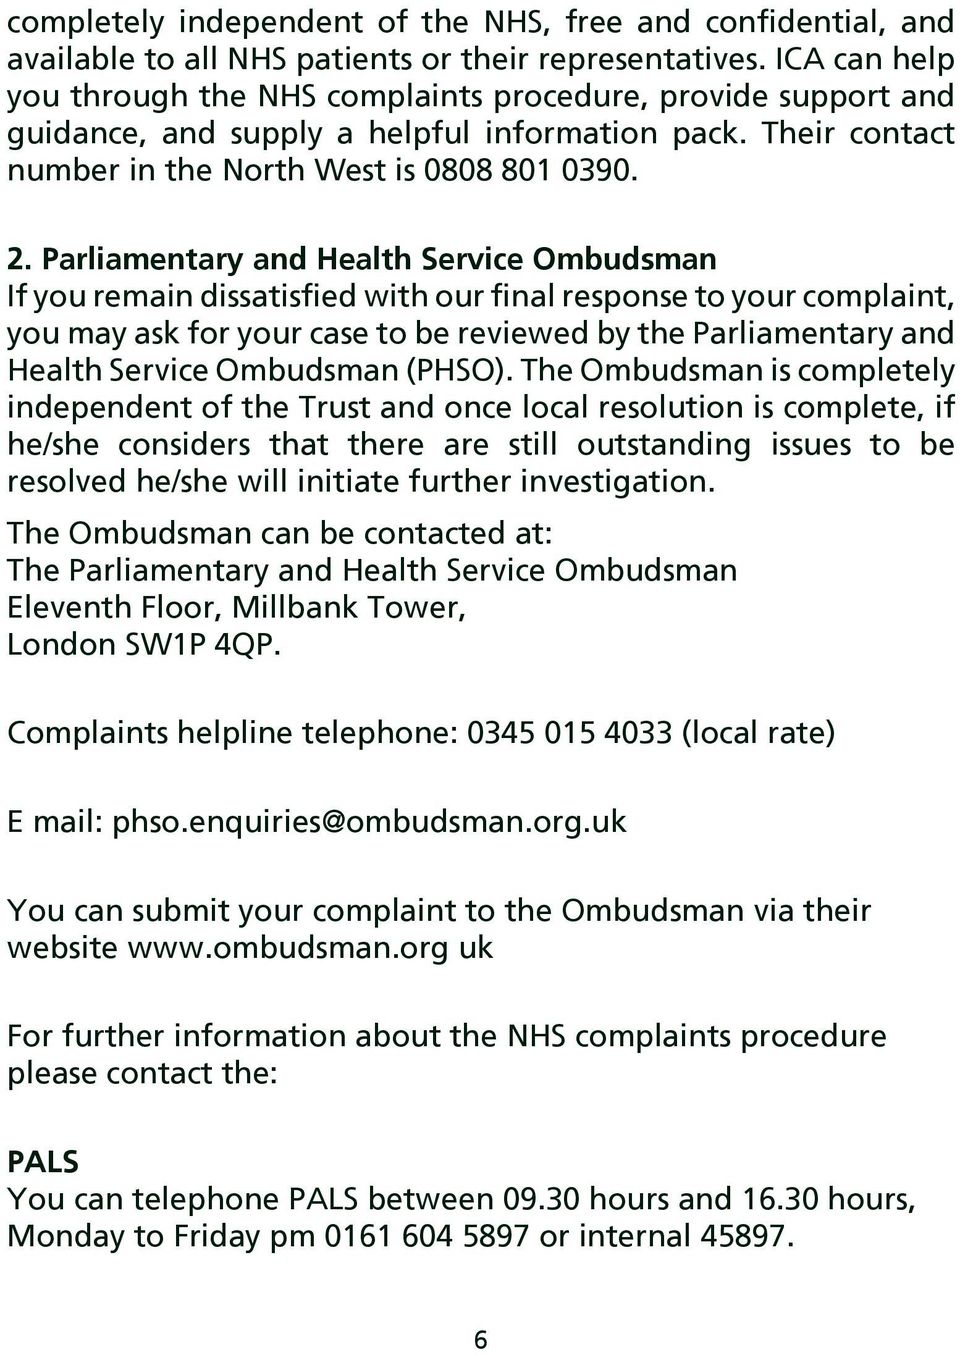 Parliamentary and Health Service Ombudsman If you remain dissatisfied with our final response to your complaint, you may ask for your case to be reviewed by the Parliamentary and Health Service